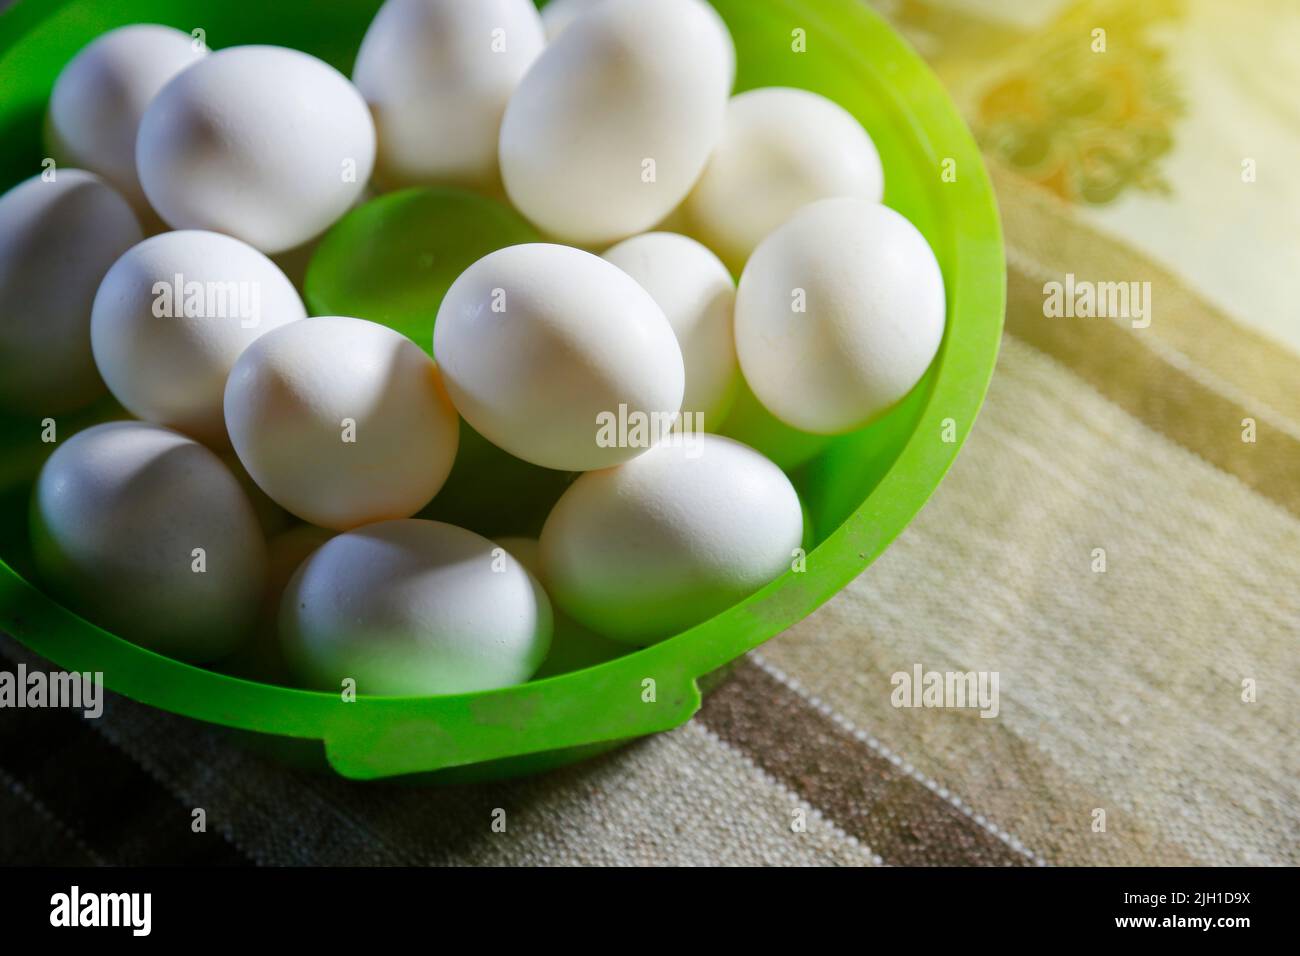 assorted white eggs grouped in green bowl on table and soft side lighting Stock Photo